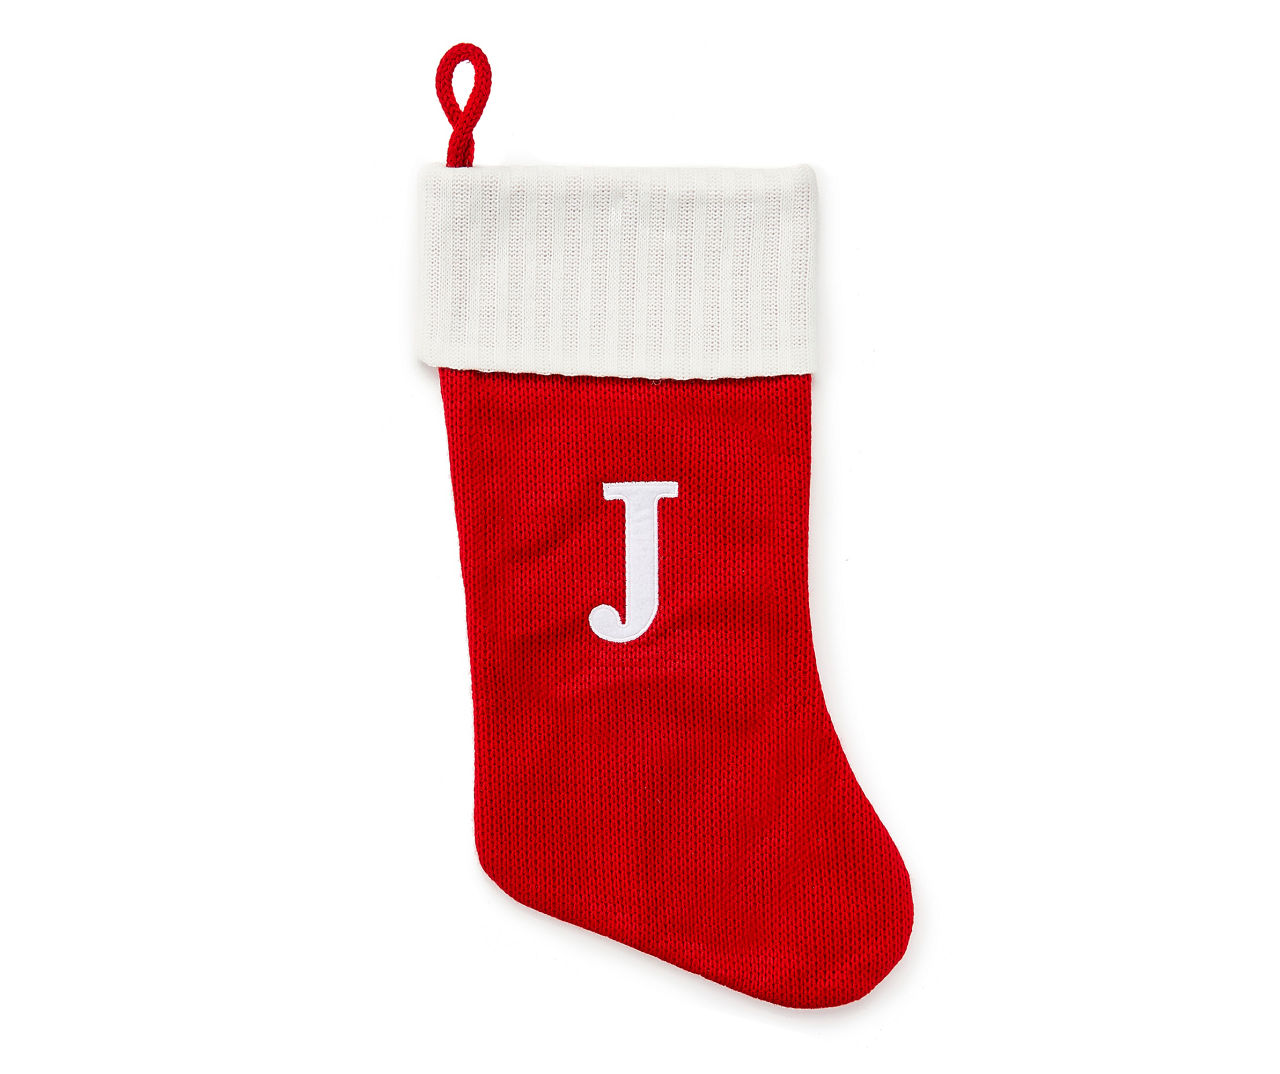 KNIT INITIAL STOCKING LETTER J